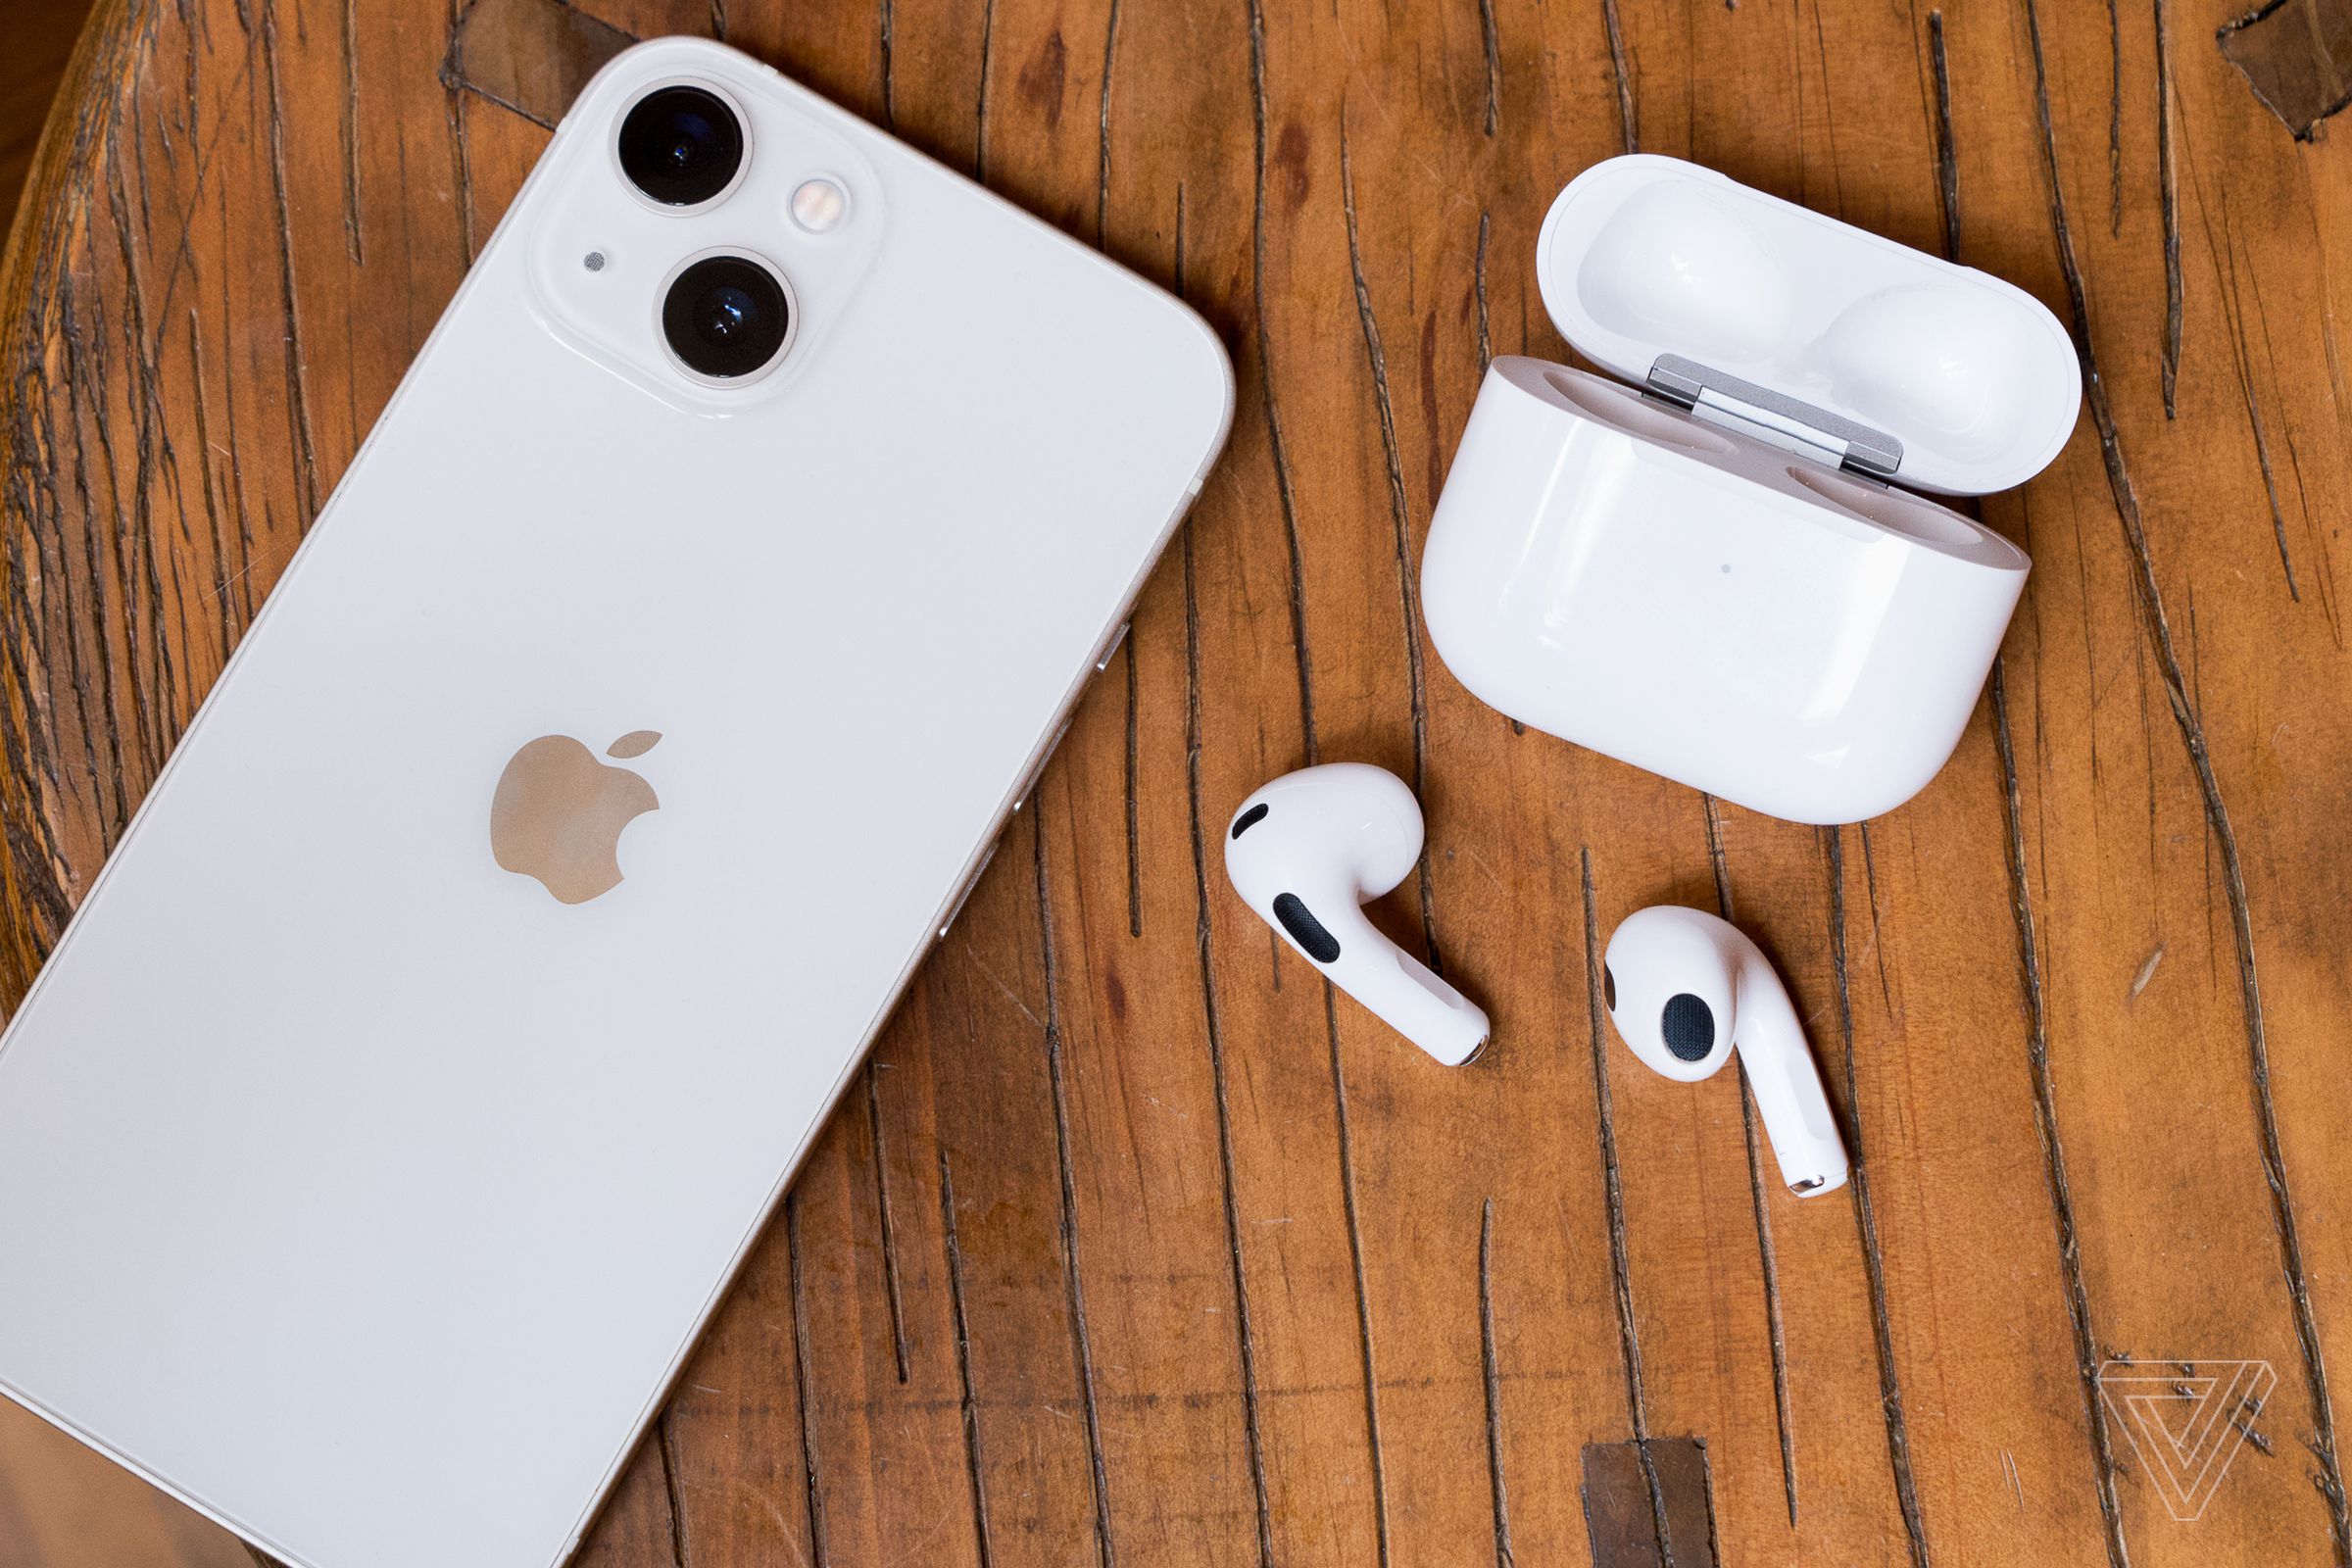 Like all AirPods before them, the third-gen earbuds are positioned as the perfect iPhone accessory.